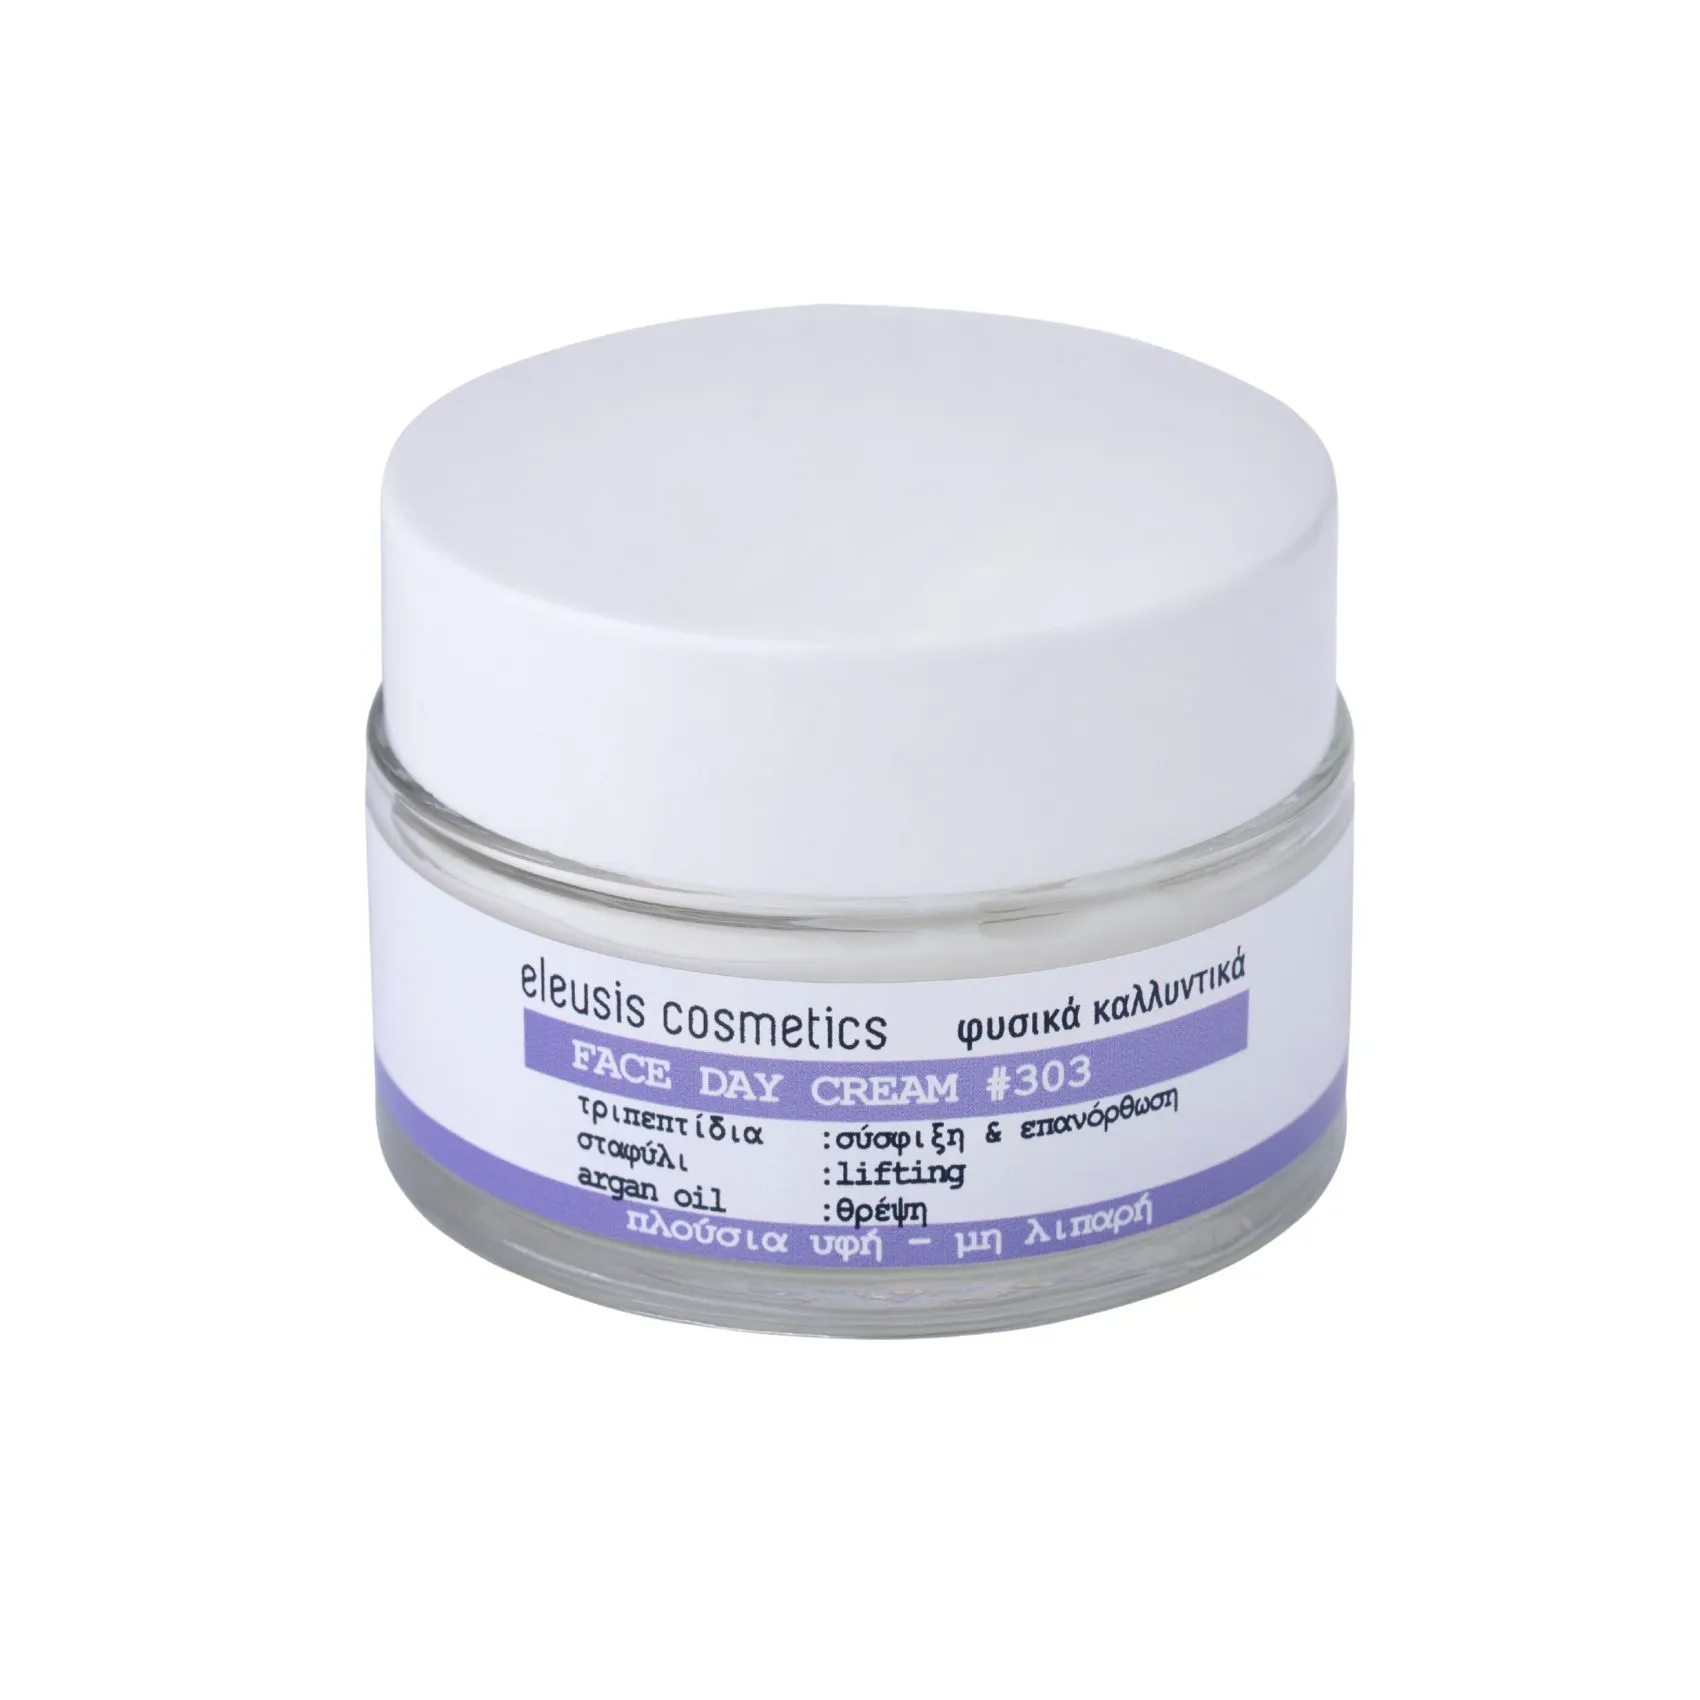 image of Face Day cream #303 Lifting 